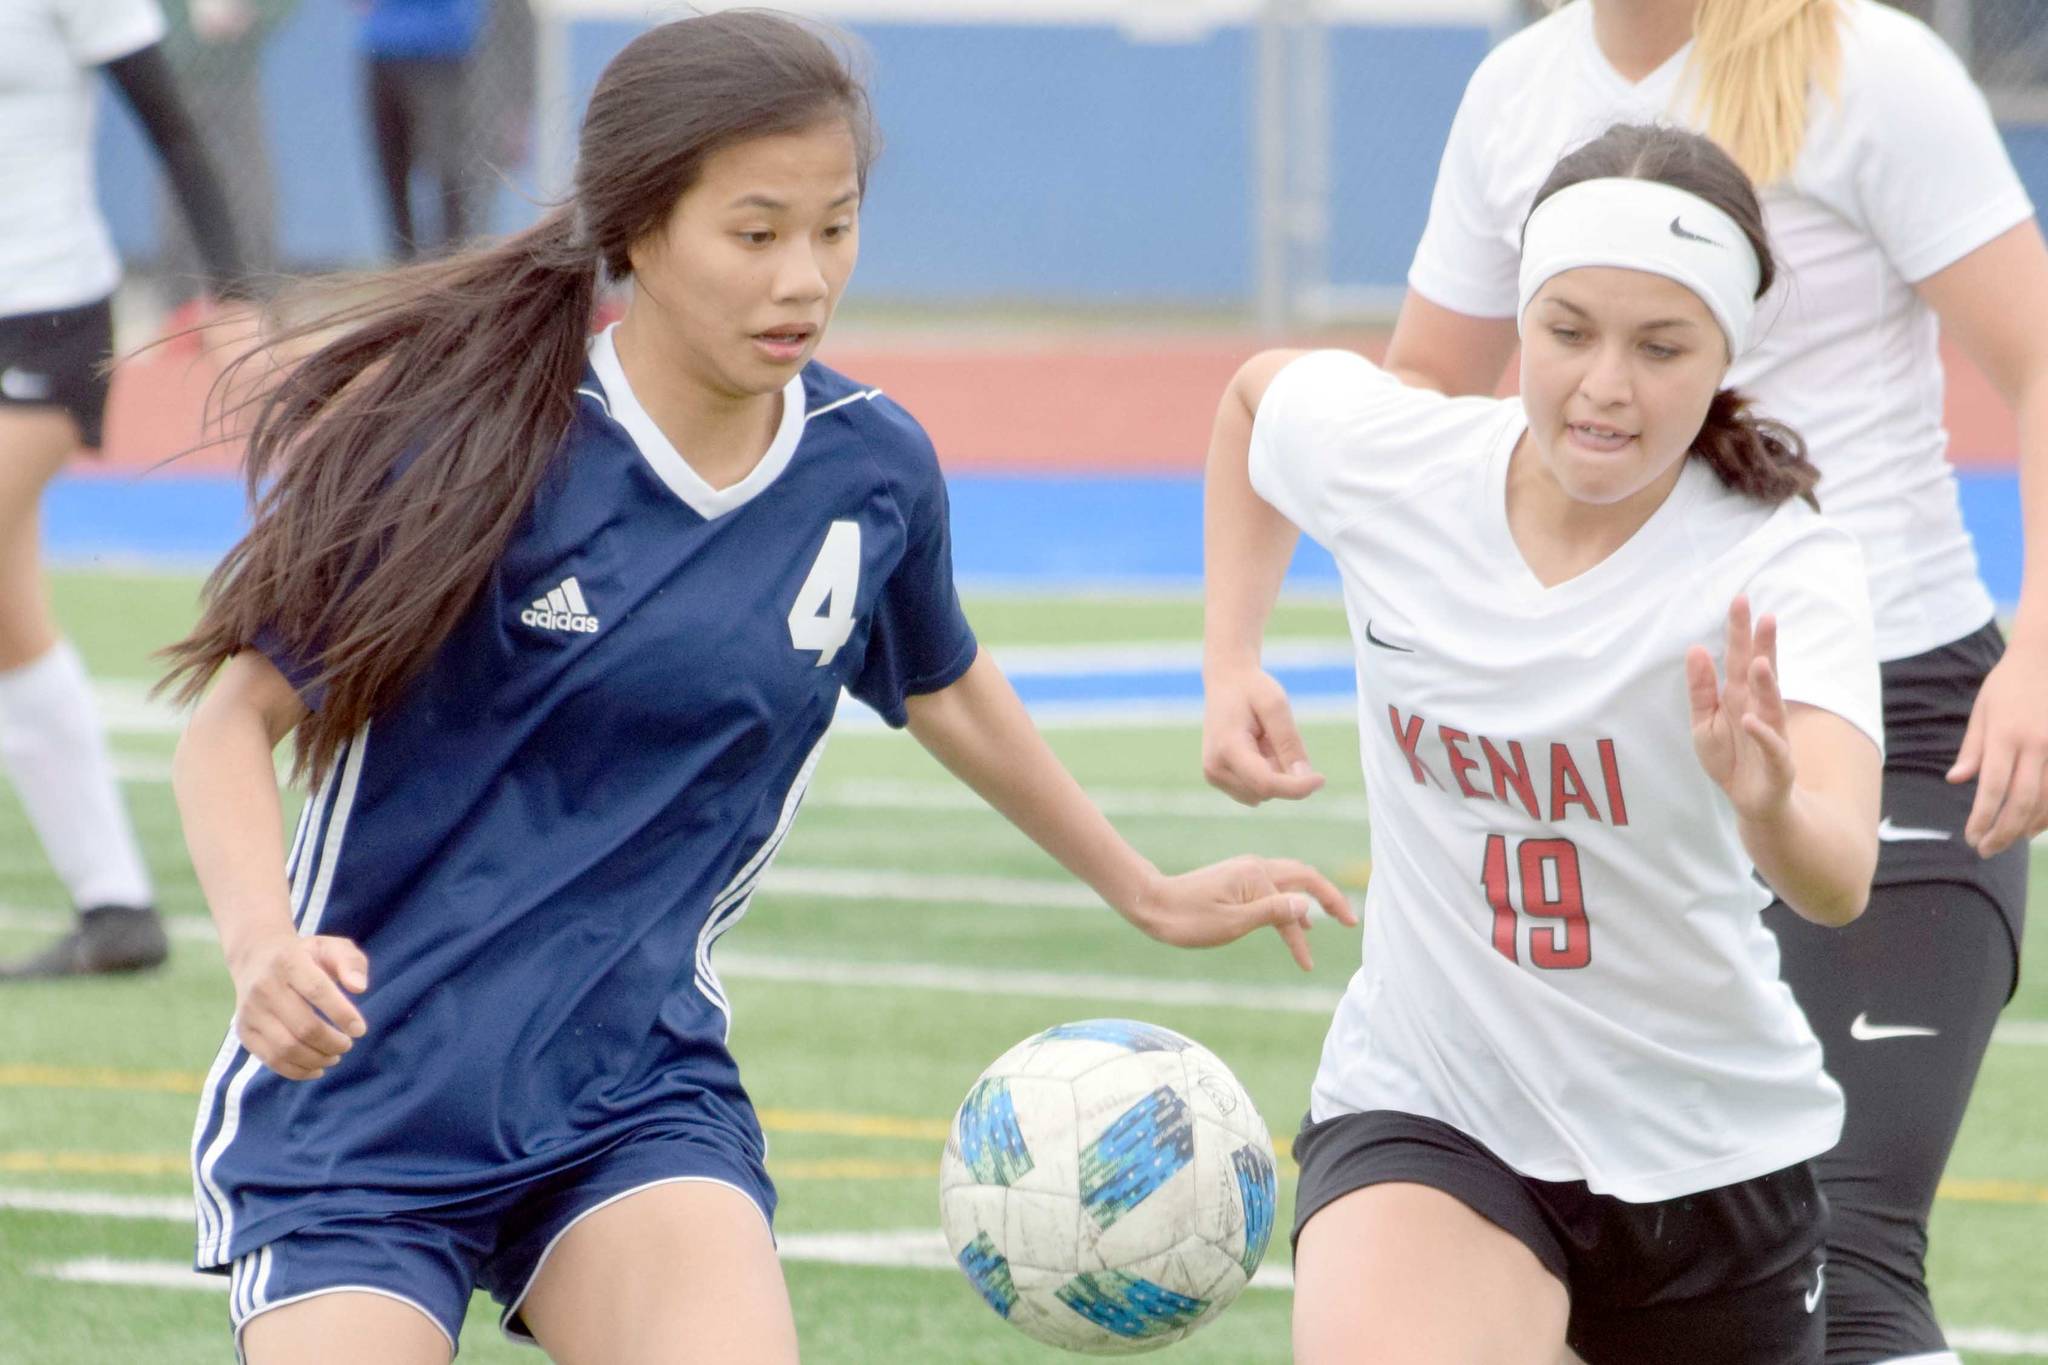 Peninsula Conference tournament preview: Teams chase state berths